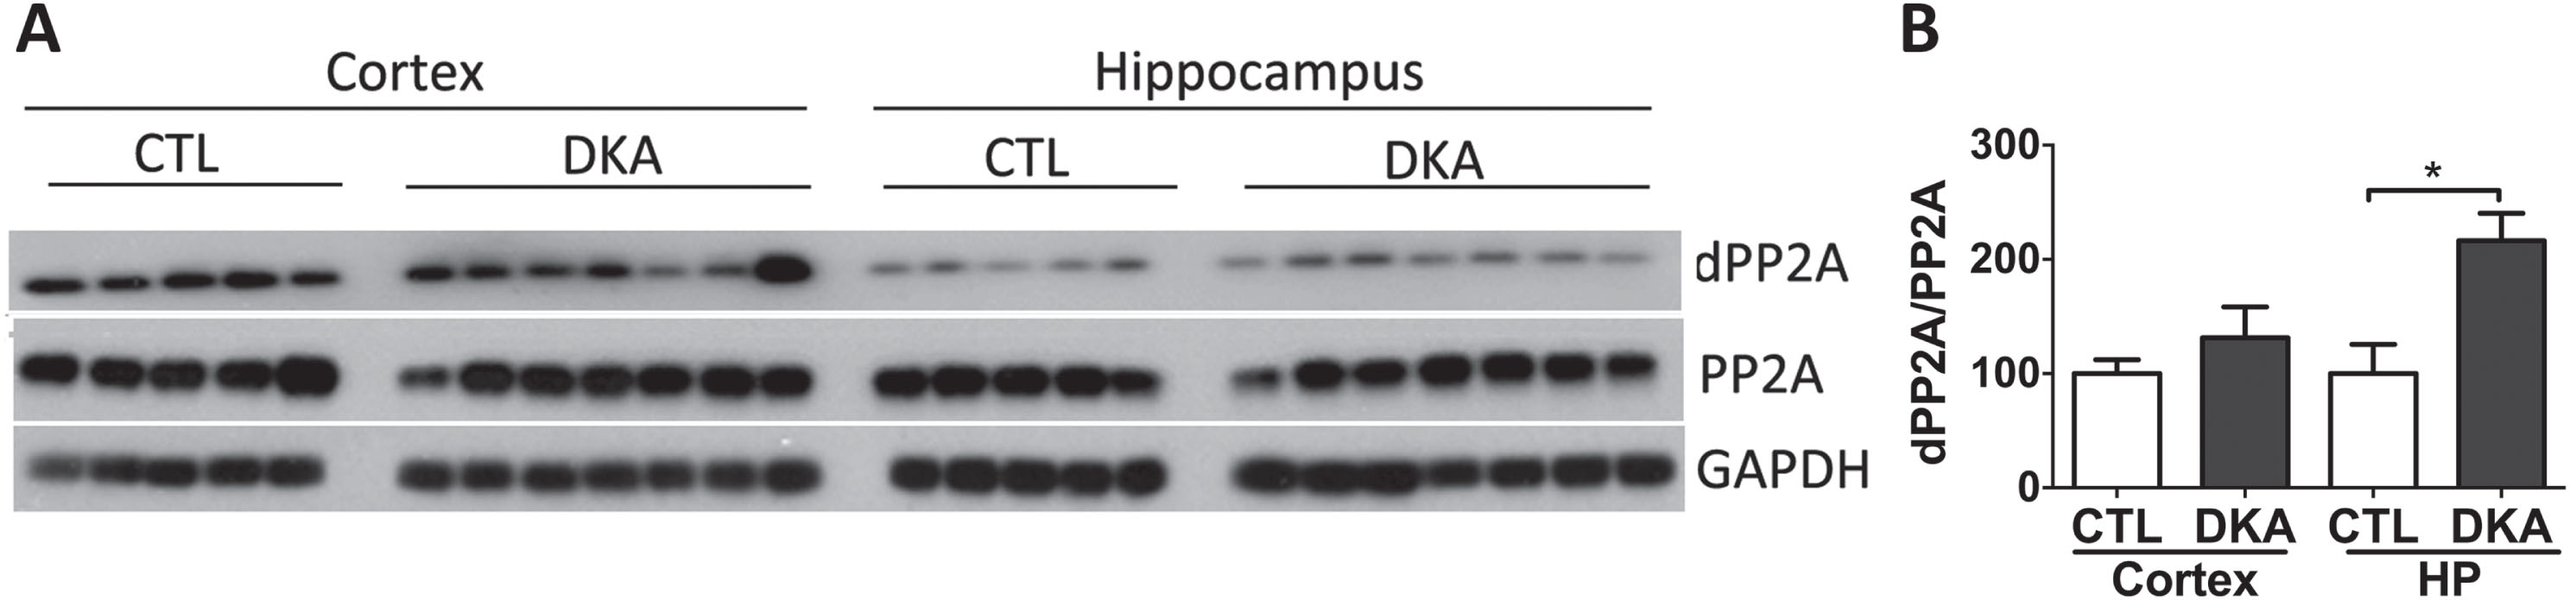 Western blots of PP2A in the brains of rats with DKA. Brain homogenates derived from the rat hippocampal and cortical homogenates were subjected to western blots developed with antibodies against the catalytic subunit of PP2A or demethylated PP2A (dPP2A) (A). The blots were then quantified by densitometry, and the relative levels of dPP2A/PP2A are shown in (B) (mean±SEM, n = 5−7/group).